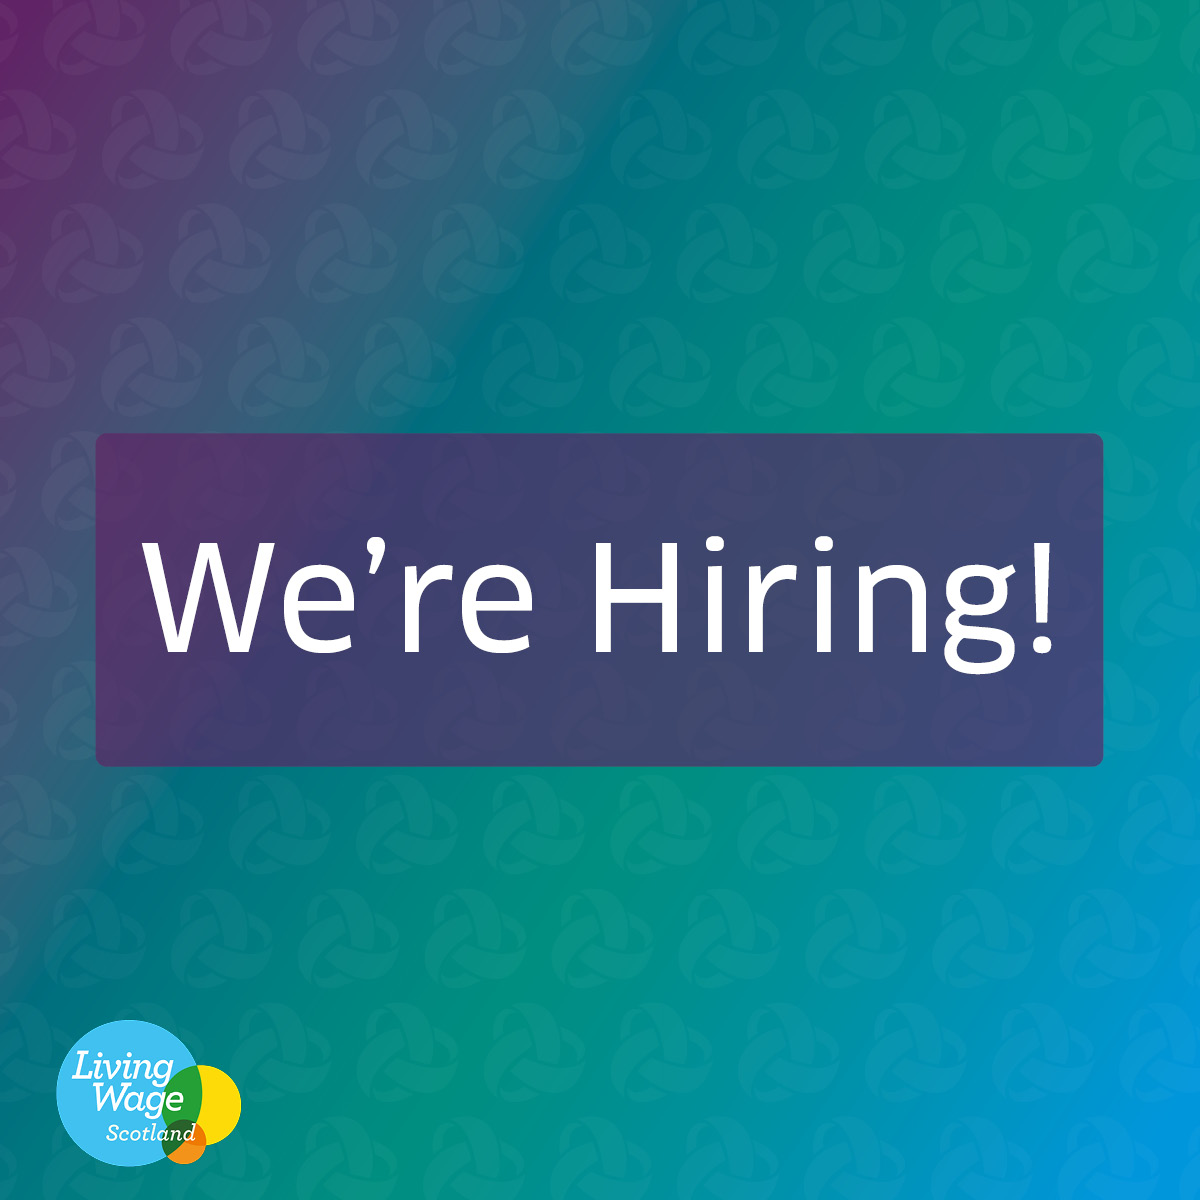 Work with us! We are recruiting 4 Strategic National Clinical Lead posts for: - Acute - Psychiatry - Child Health - Paediatrics and Neonatal - Obstetrics We are the leading improvement organisation for health and care in Scotland. Link in the comments.